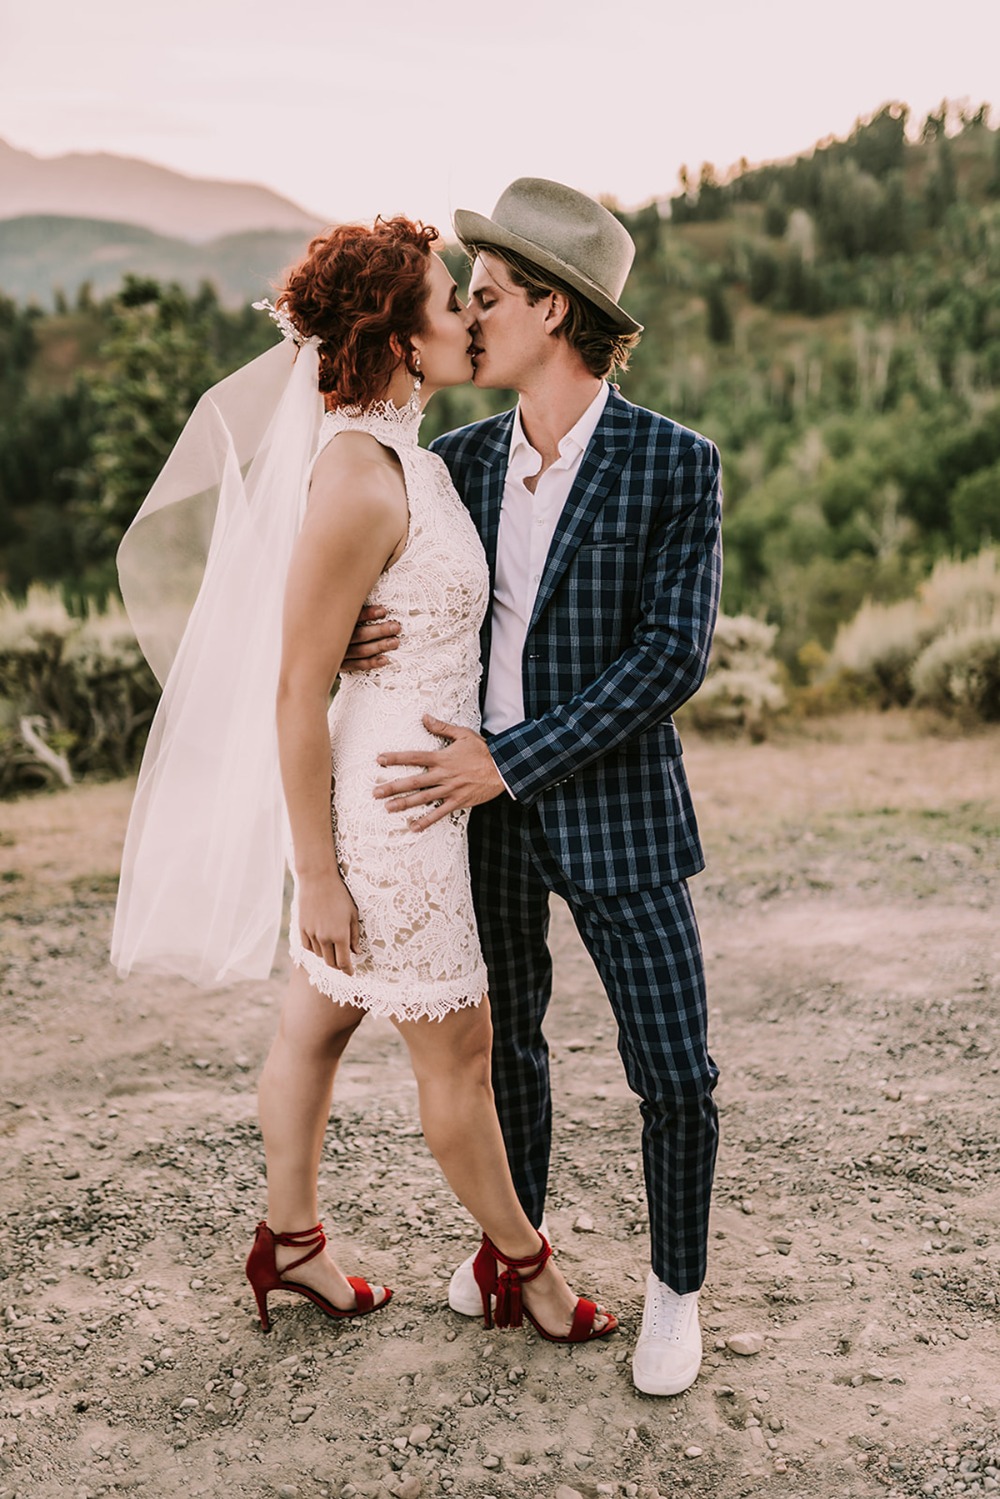 Stylish after-wedding shoot of the bride and groom